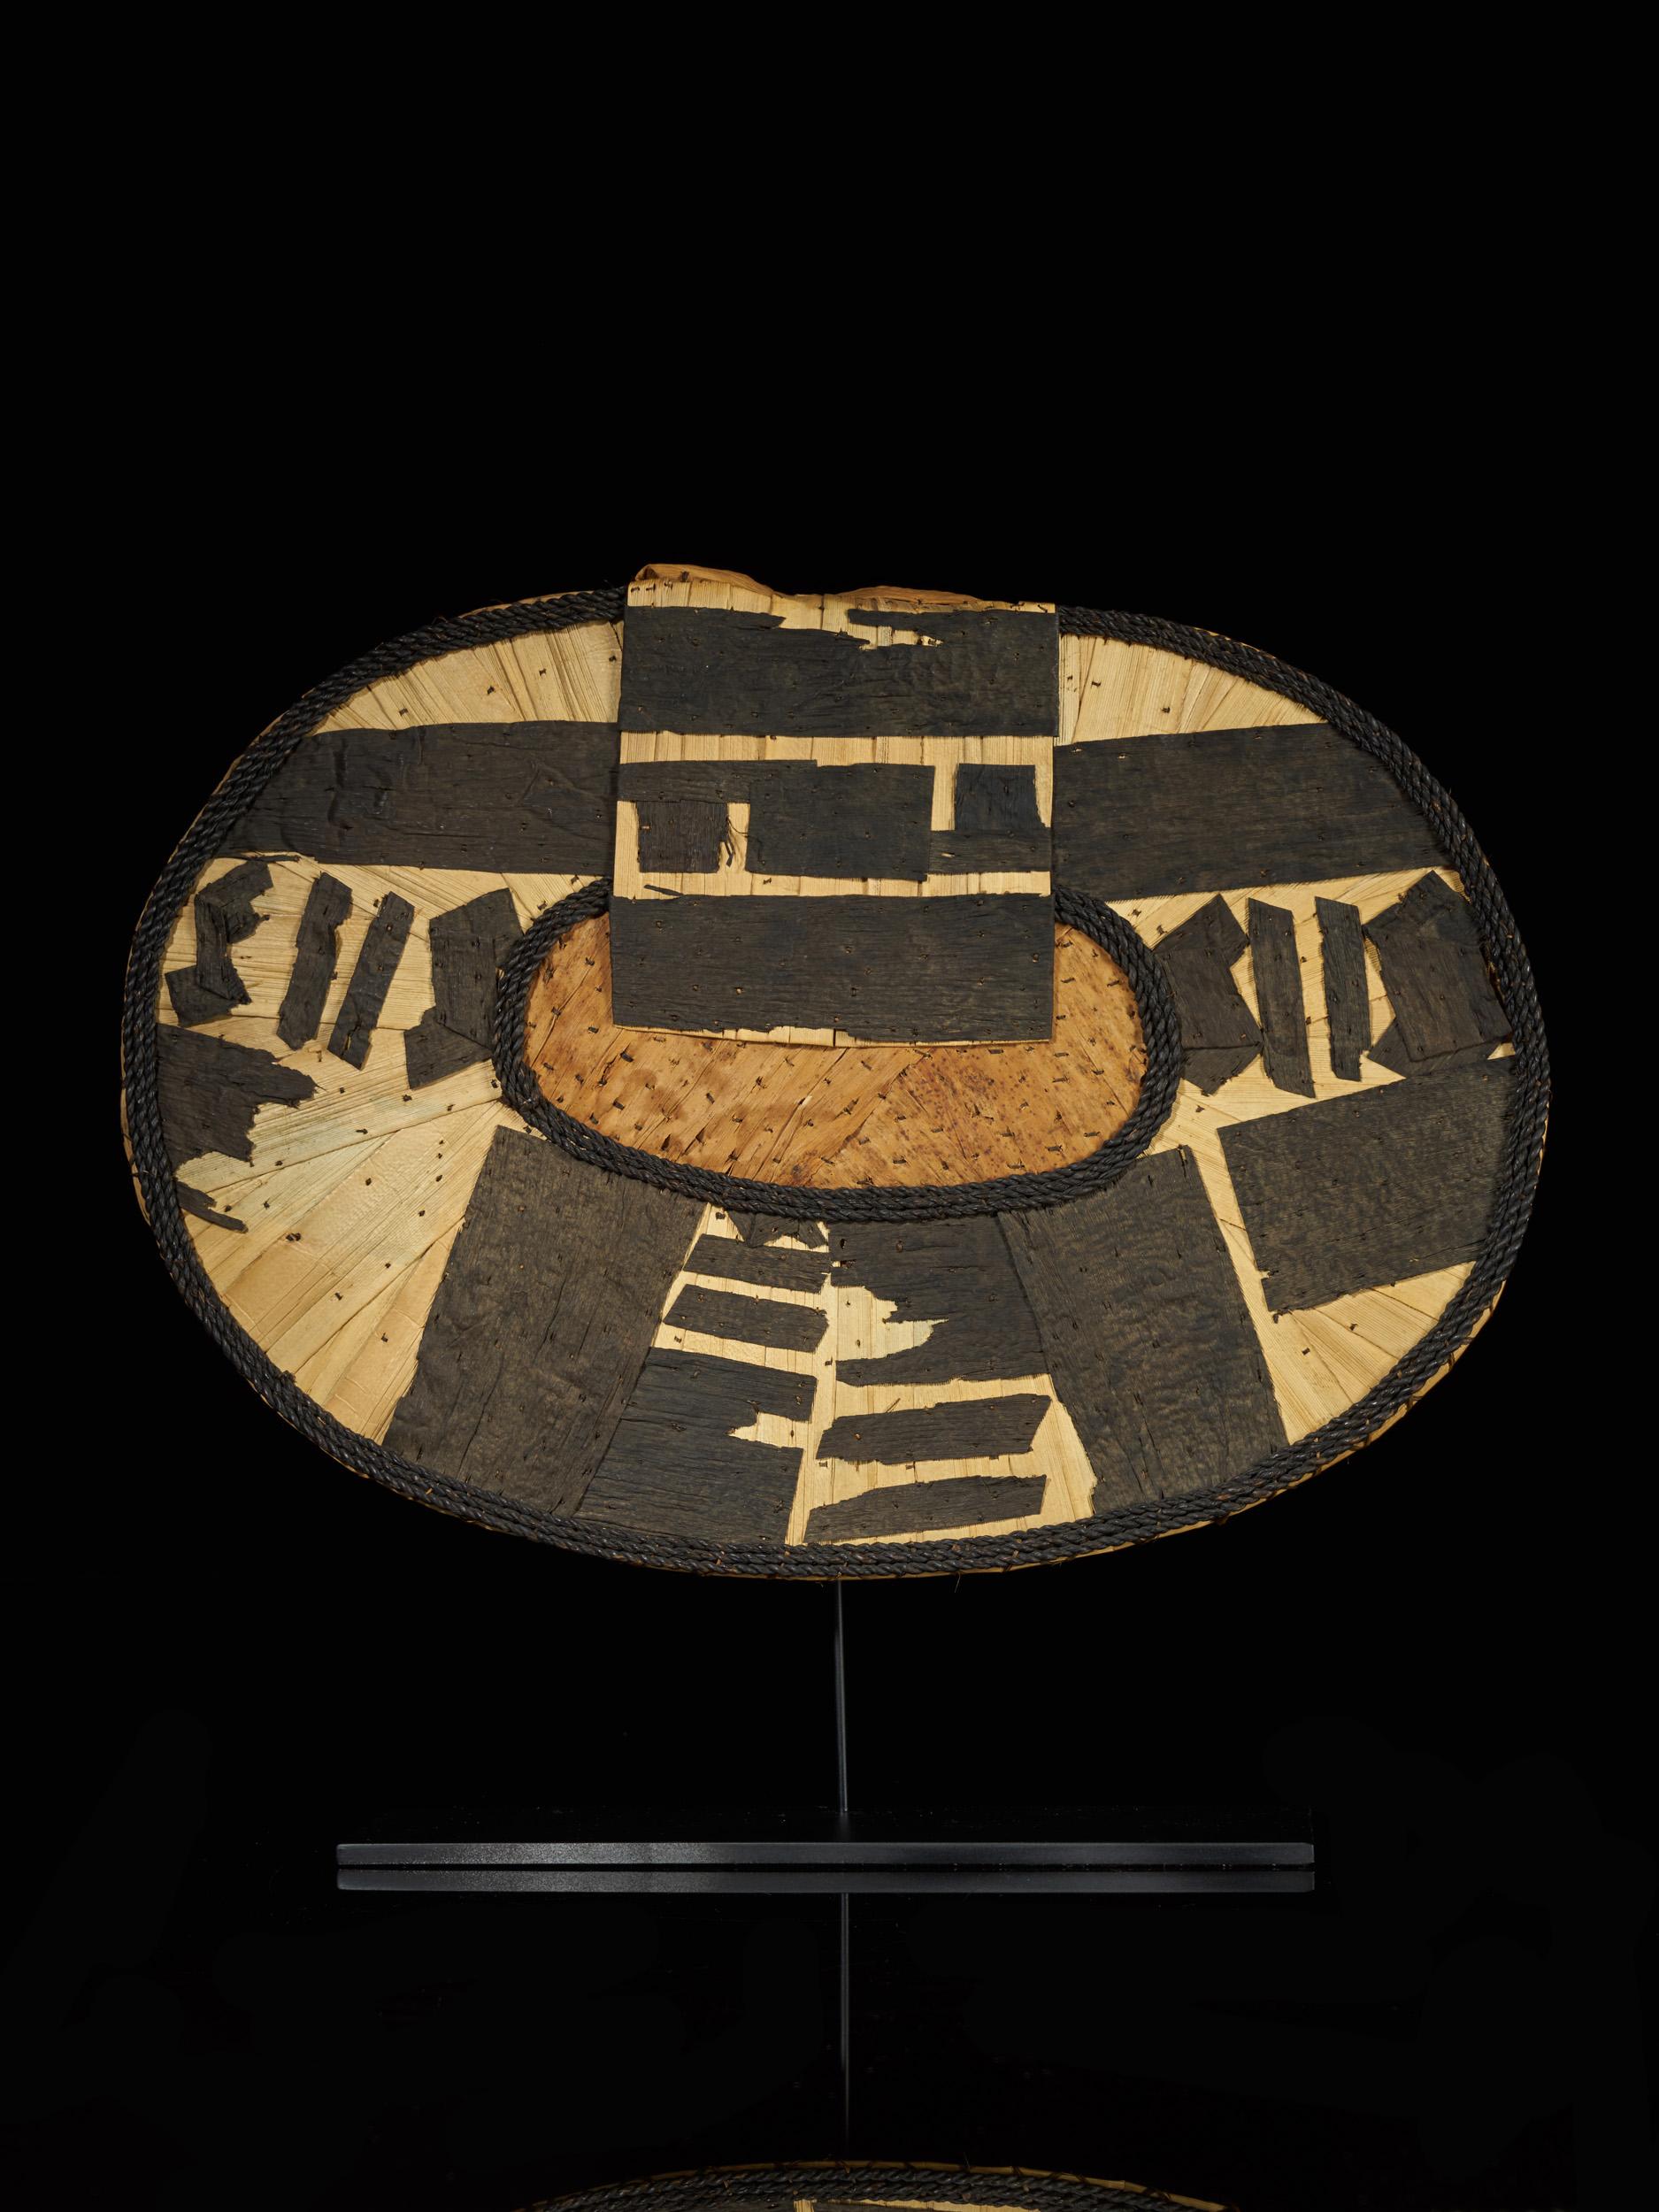 Back aprons (negbe, pl. egbe) were trendy among upper-class Mangbetu women at the turn of the twentieth century. This distinctive kidney-shaped ornament pad was built up of intricately layered banana leaves. Worn on special occasions, egbe were